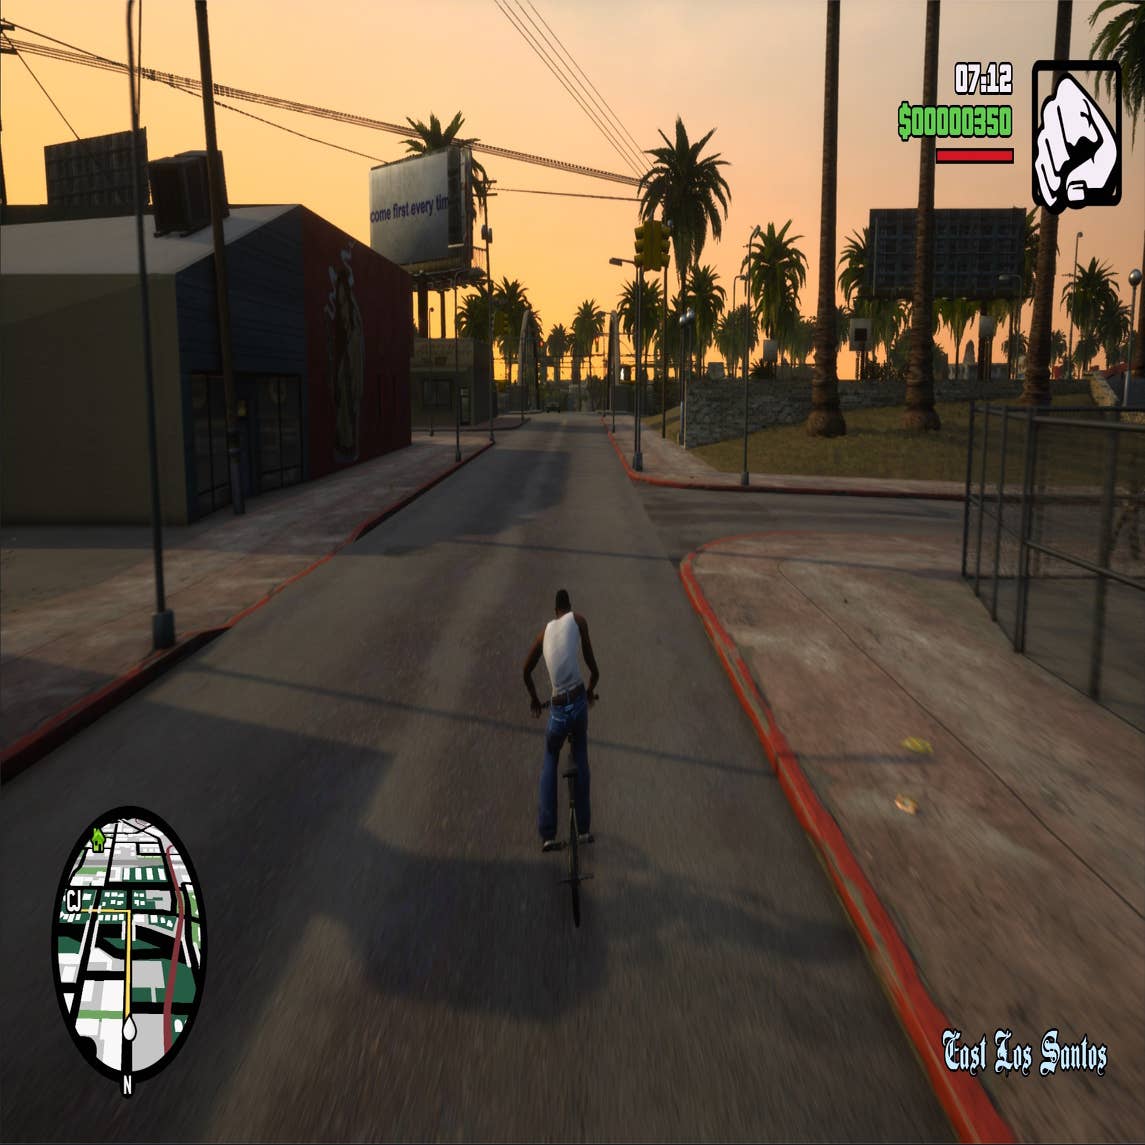 GTA San Andreas cheats, all codes for Xbox, PC, Switch, PS4 & mobile